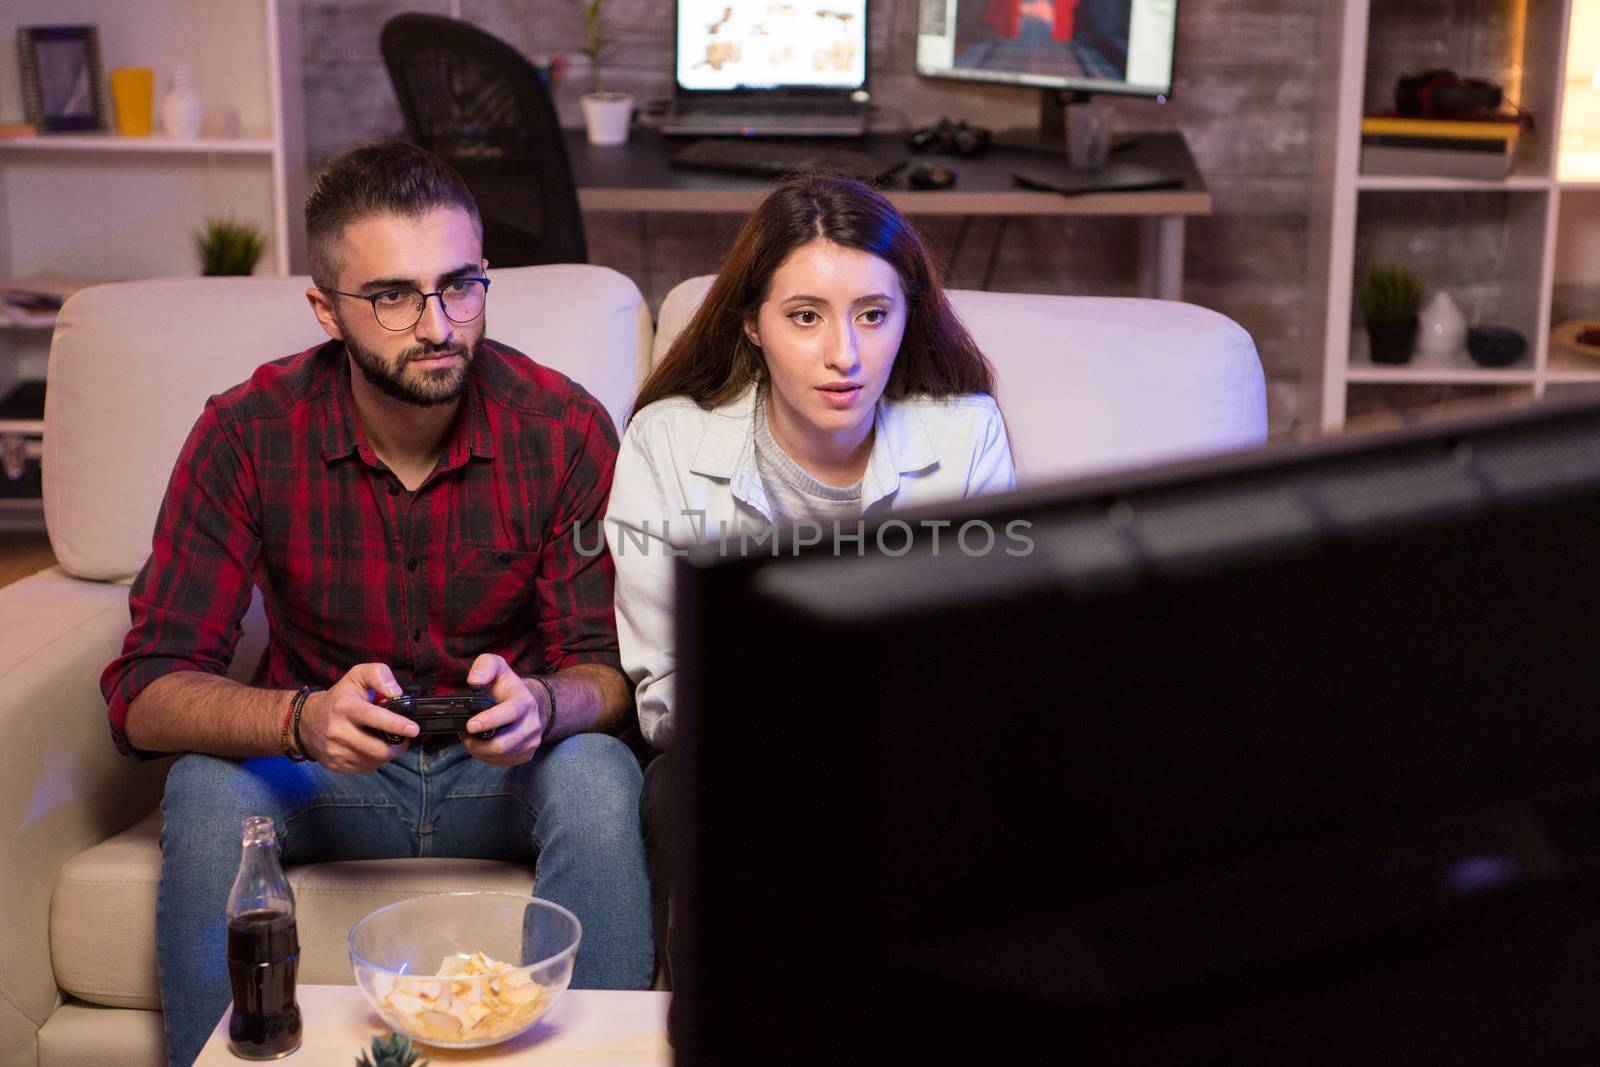 Joyful young couple playing video games on television using controllers at night. Couple sitting on couch